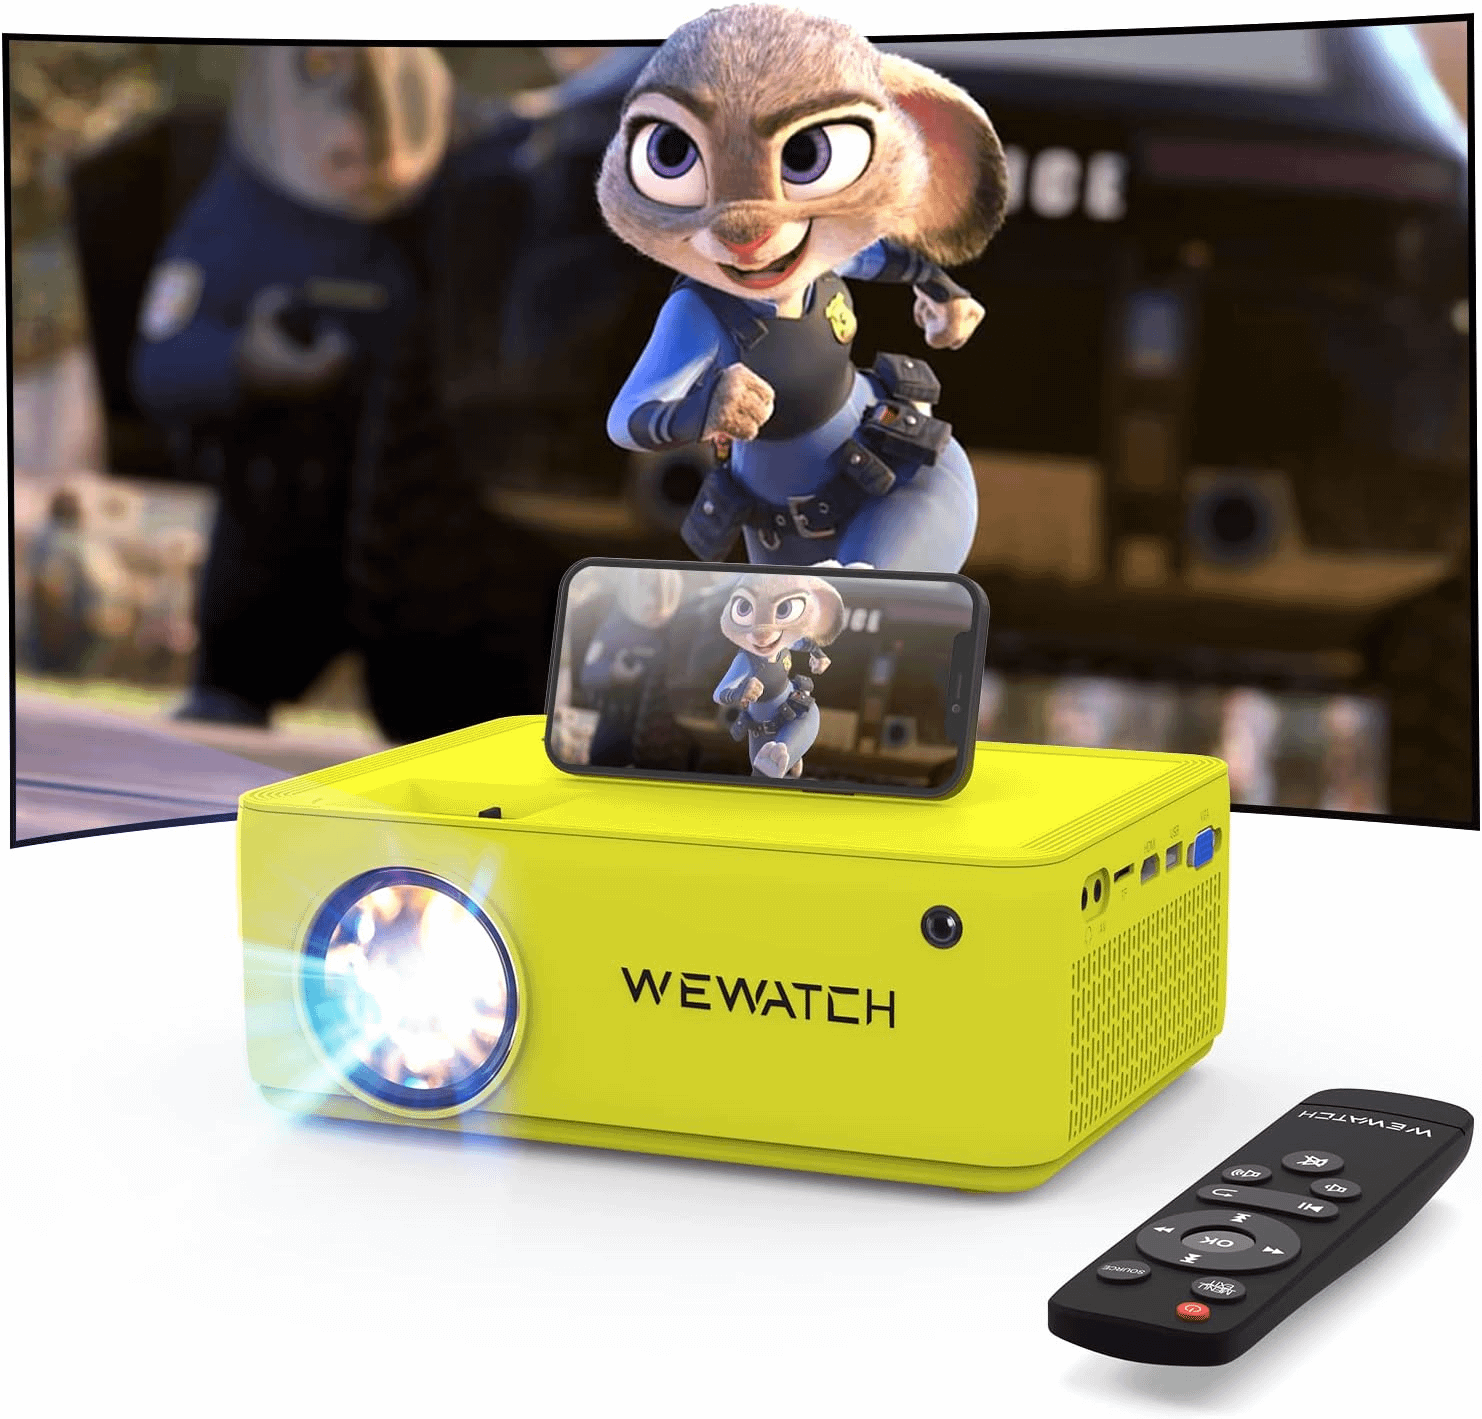 Black Friday Projector Deals - WEWATCH Mini Projector